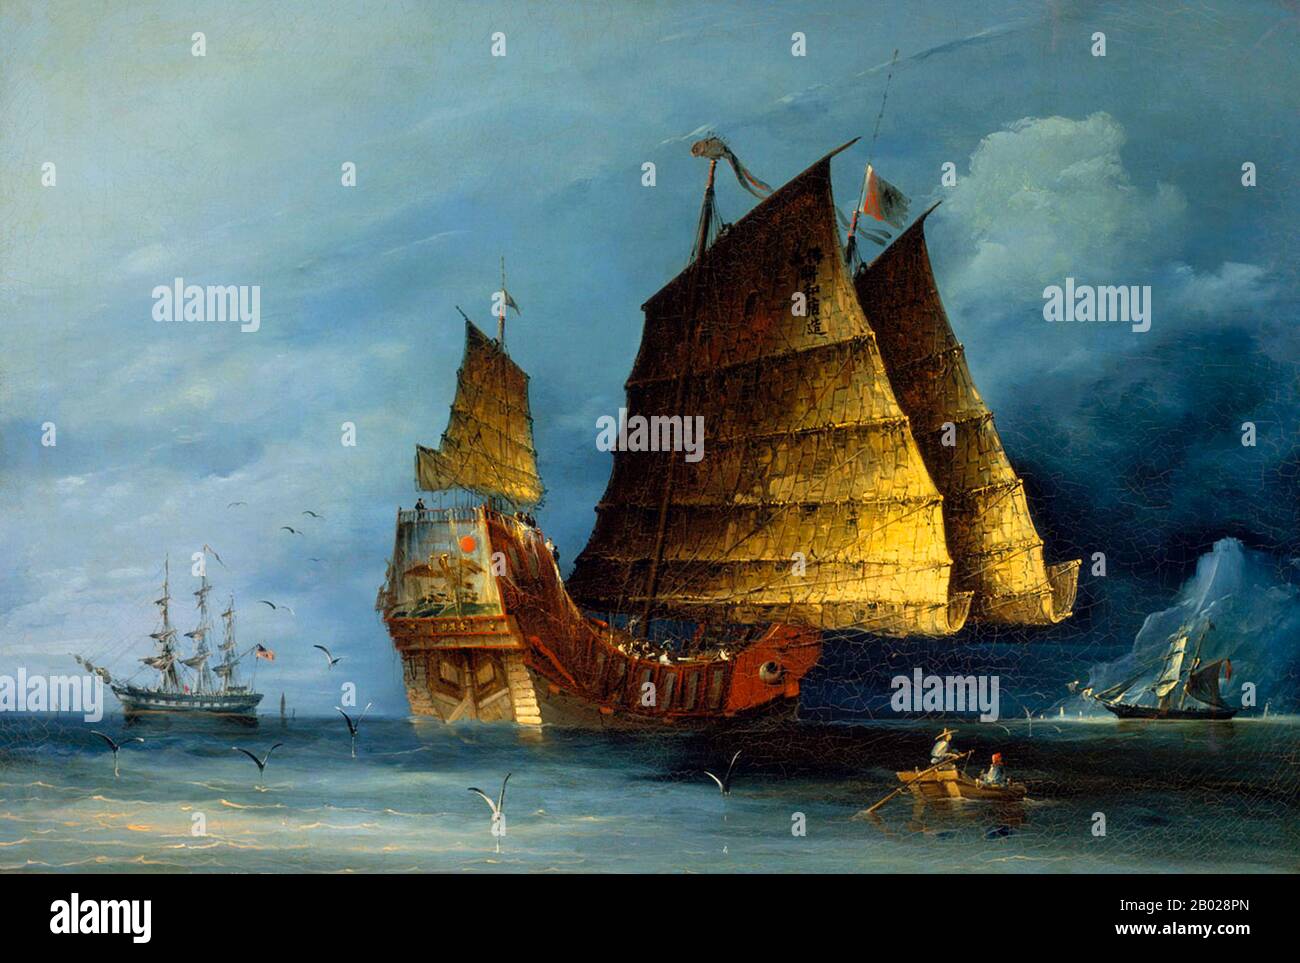 On the sail of the junk shown there is an inscription bearing five Chinese characters, namely, 'Fo Shan Lian He Dian Zao' ('manufactured by the United Shop in Foshan'). The inscription probably refers to the manufacturer of the sails.  Painted on the stern of the junk are three Chinese characters 'Li Wan Jin' (from right to left), literally 'May our profit be ten thousand pieces of gold'. To the left is an American full-rigged ship, possibly a warship or a trader decorated in 'painted ports' style; to the right a rakishly rigged and fast British brigantine. Stock Photo